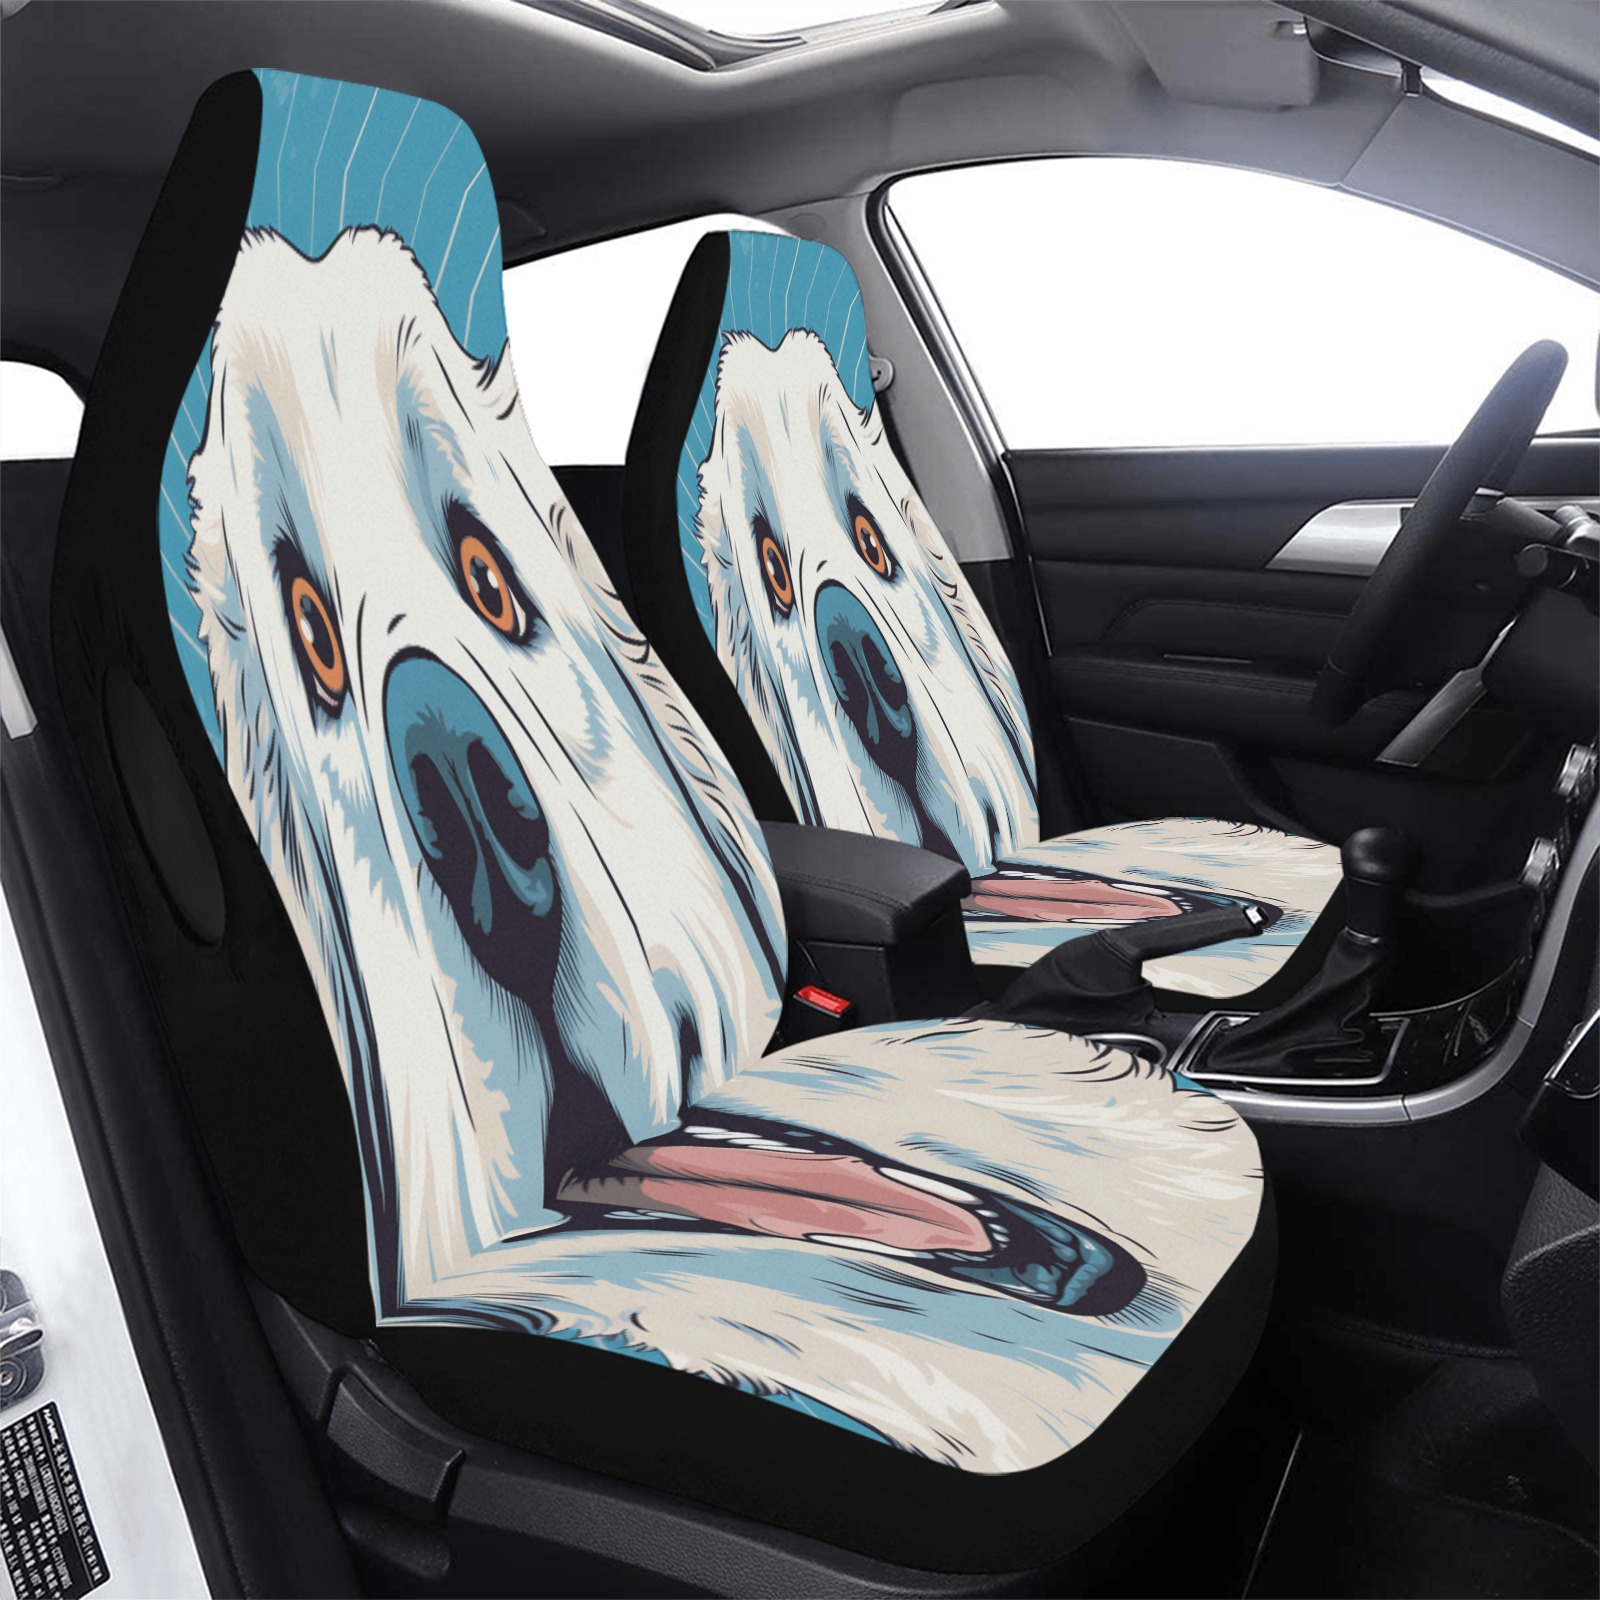 Great Pyrenean Pop Art Car Seat Cover Airbag Compatible (Set of 2)